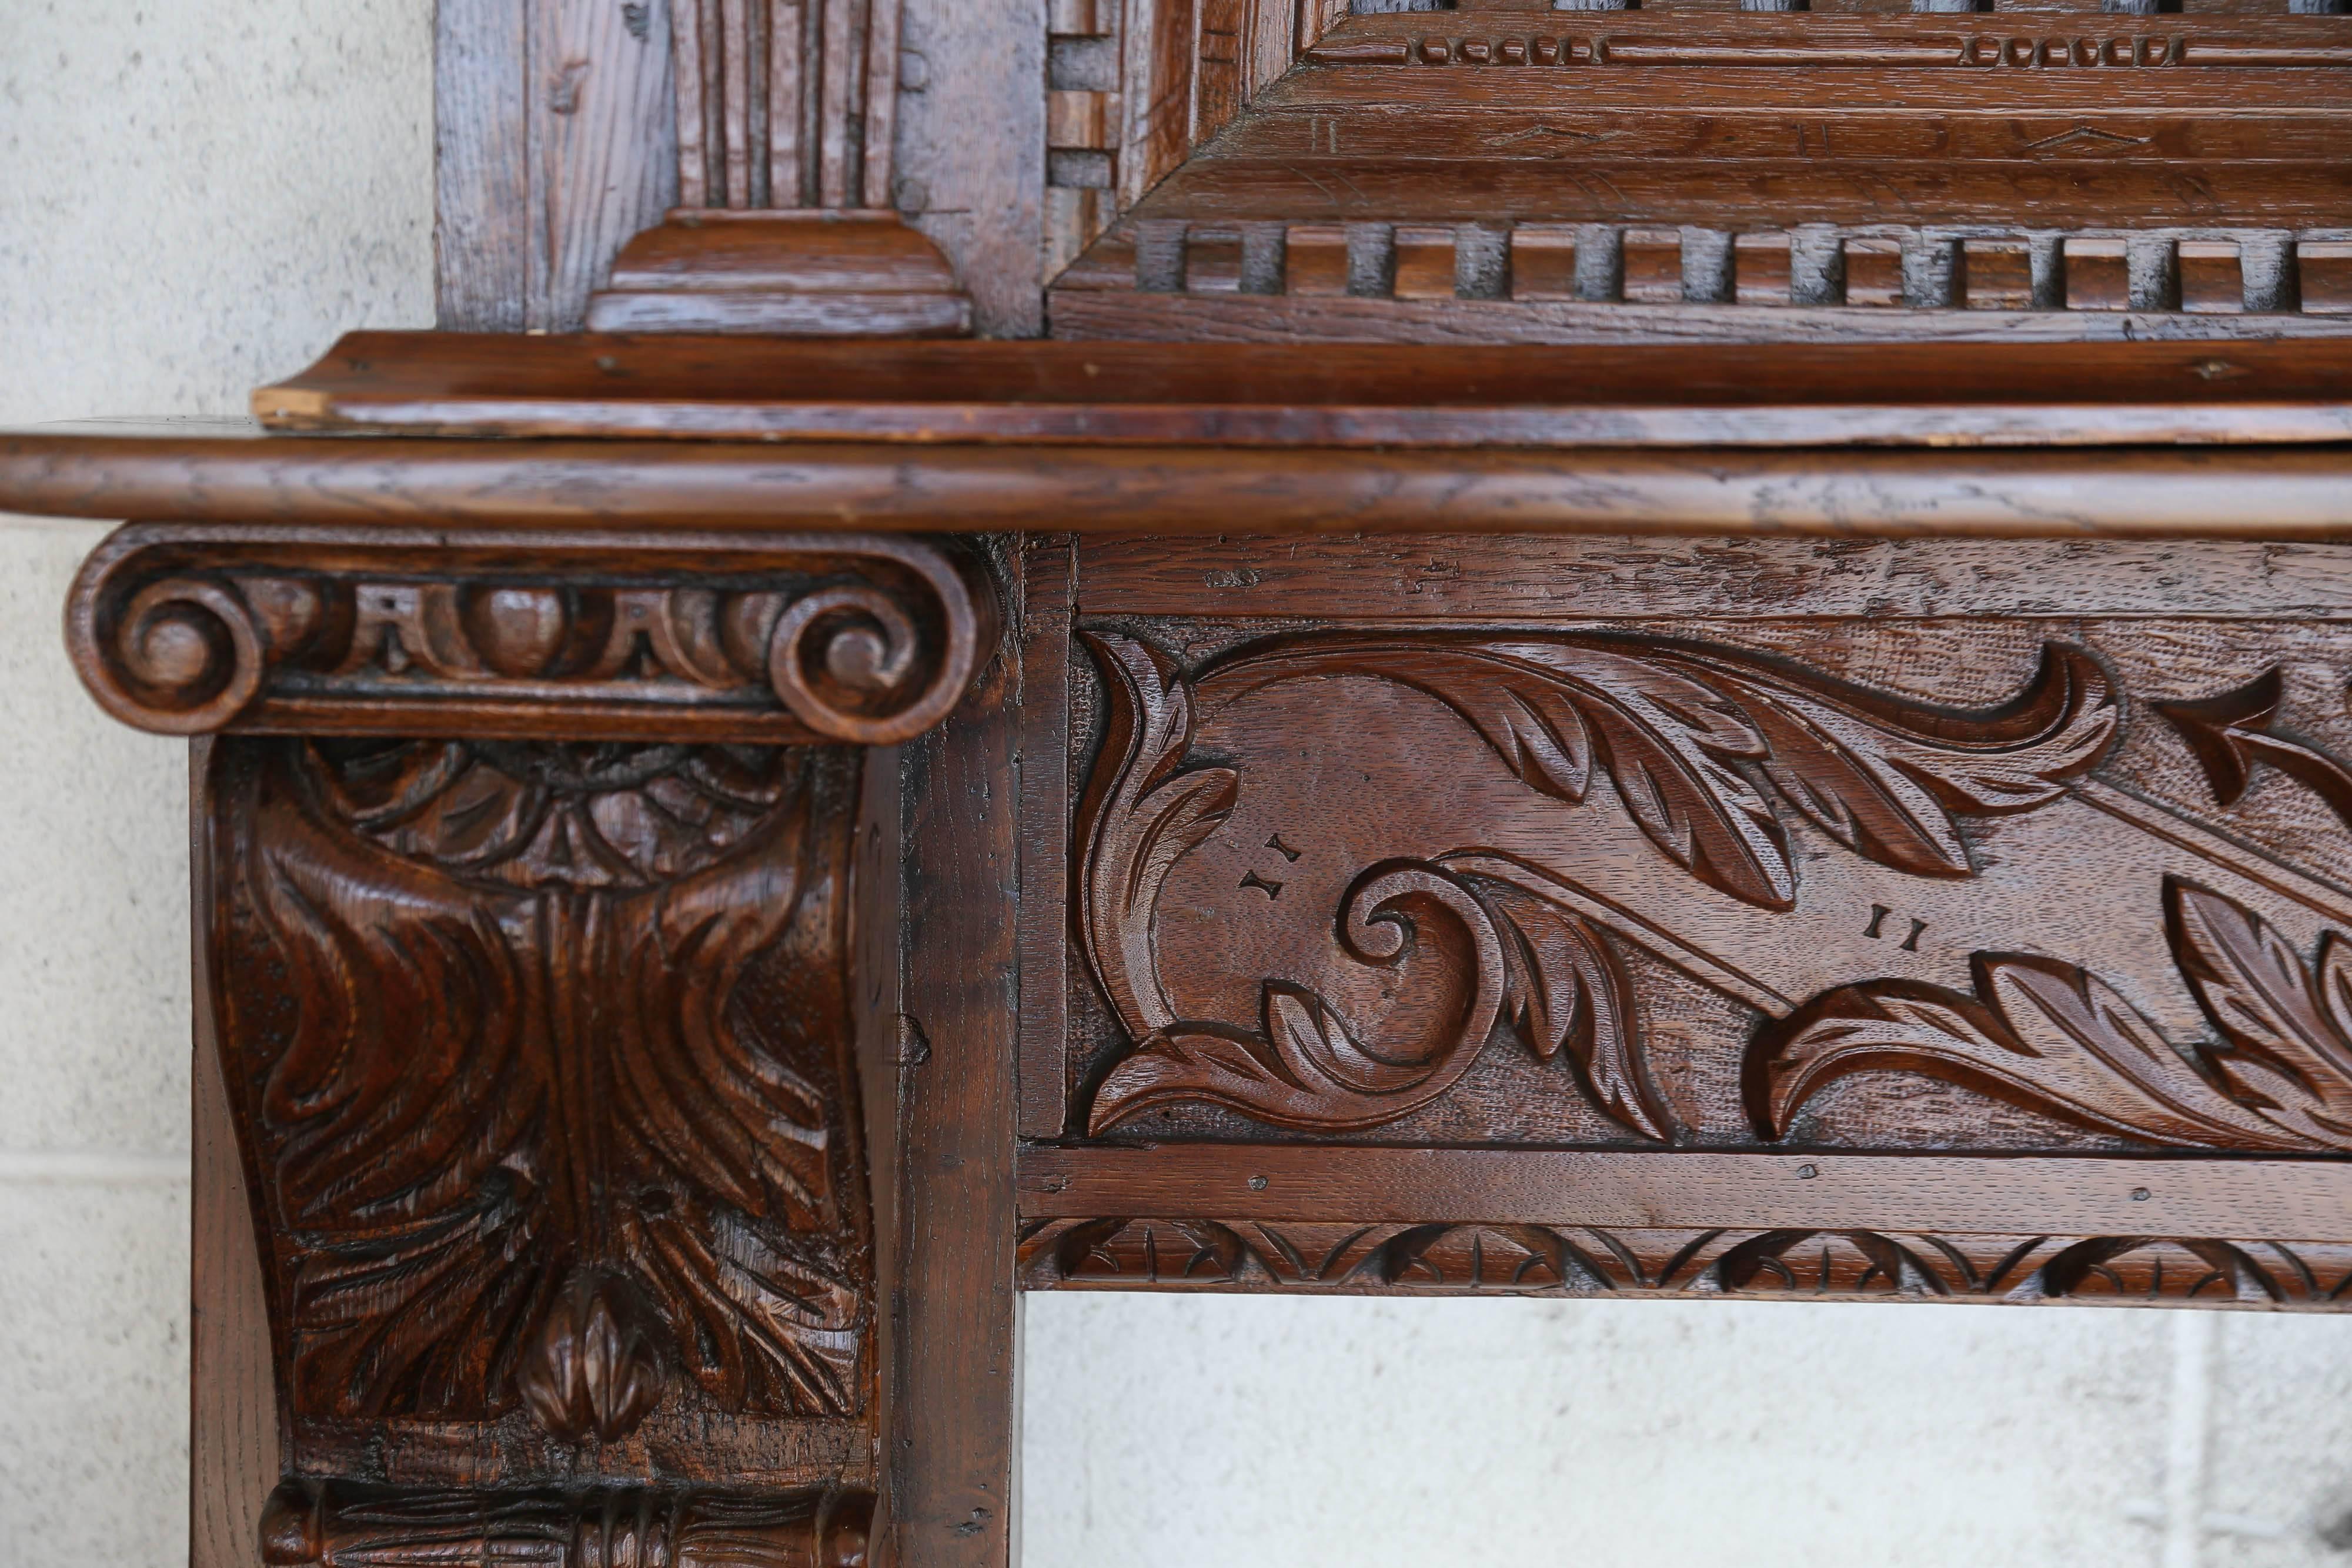 Elaborately carved English oak fireplace surround and over-mantel.
Over Mantel carvings include lion heads, bearded man in center, posts with acanthus leaves,
two more carved figures, & dentil carvings at crown. 

Fireplace Surround Posts mimic